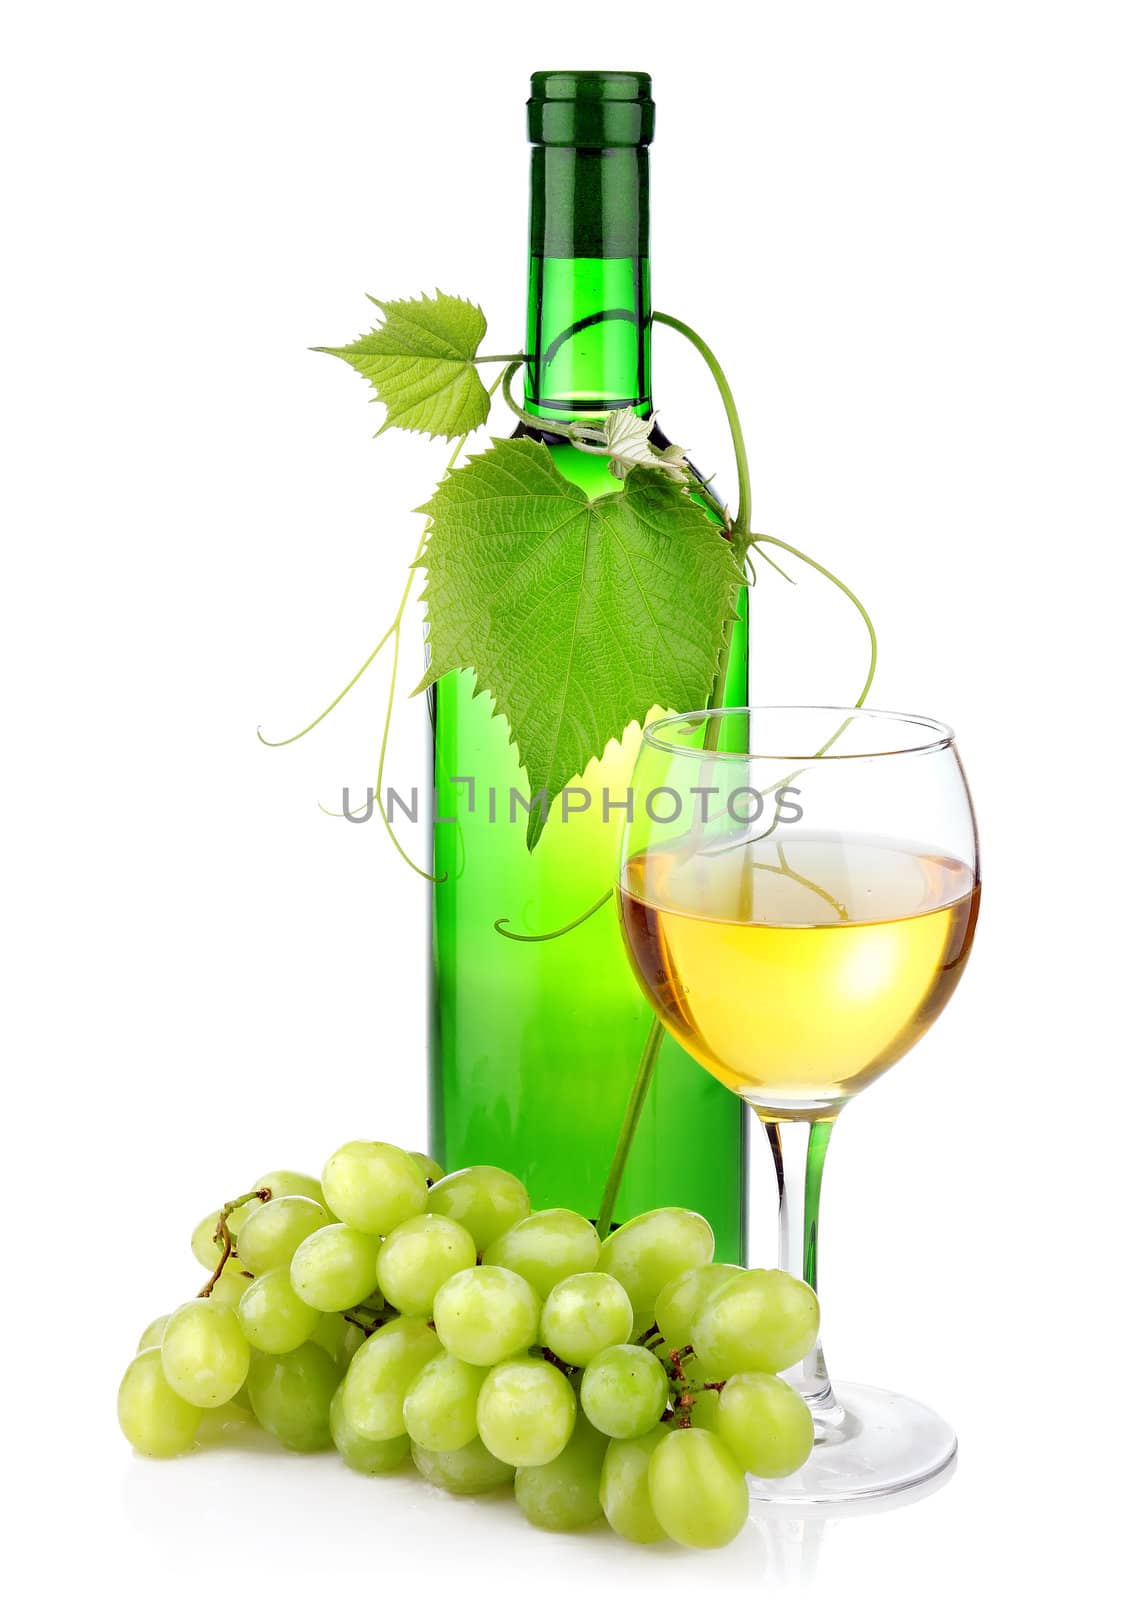 Bottle of wine with glass and grape branch isolated by alphacell